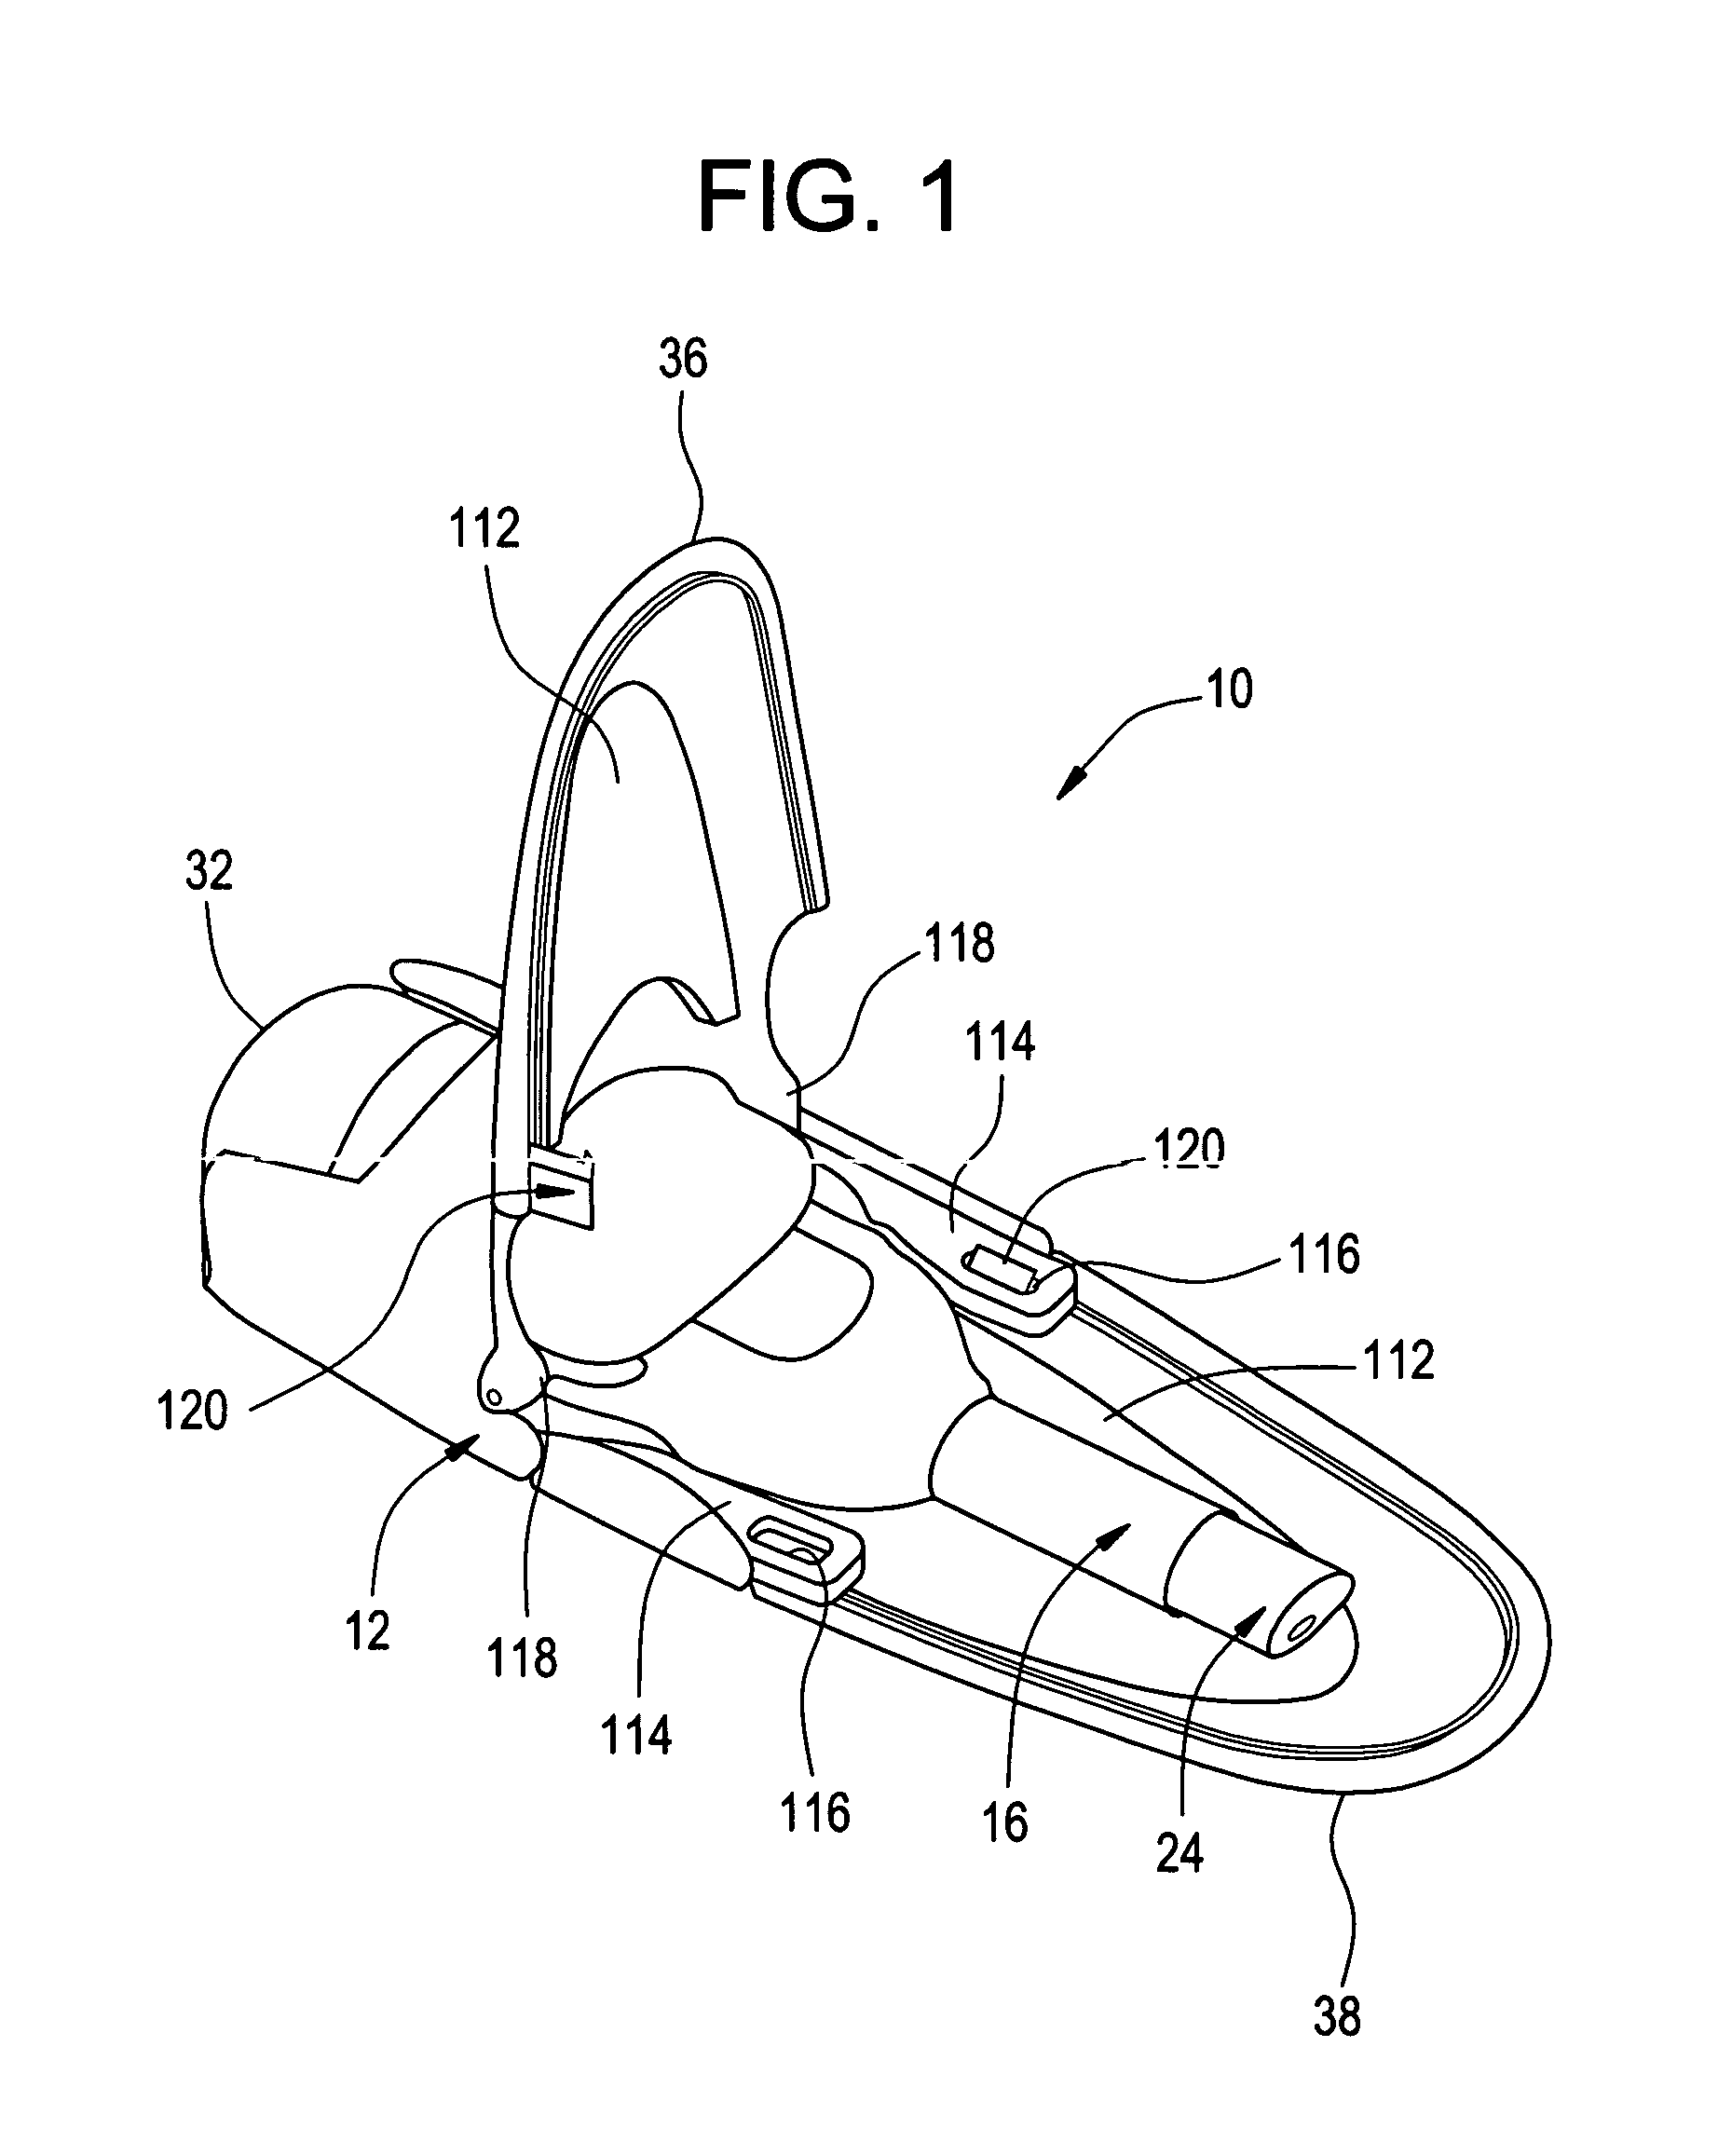 Piston-type dispenser with one-way valve for storing and dispensing metered amounts of substances